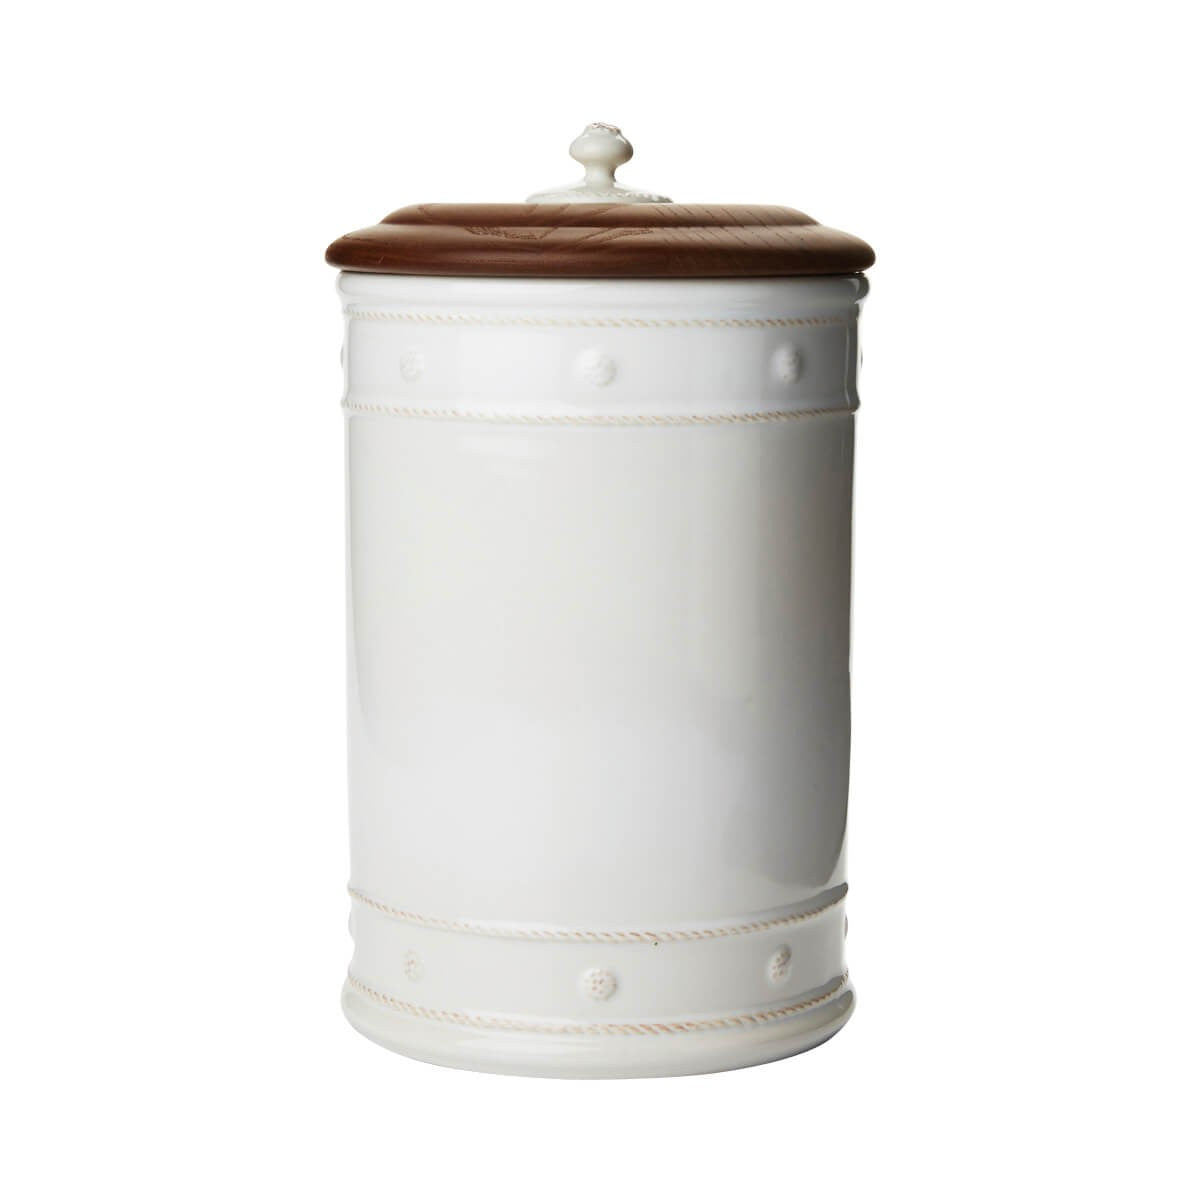 Berry & Thread Whitewash 13" Canister with Wooden Lid